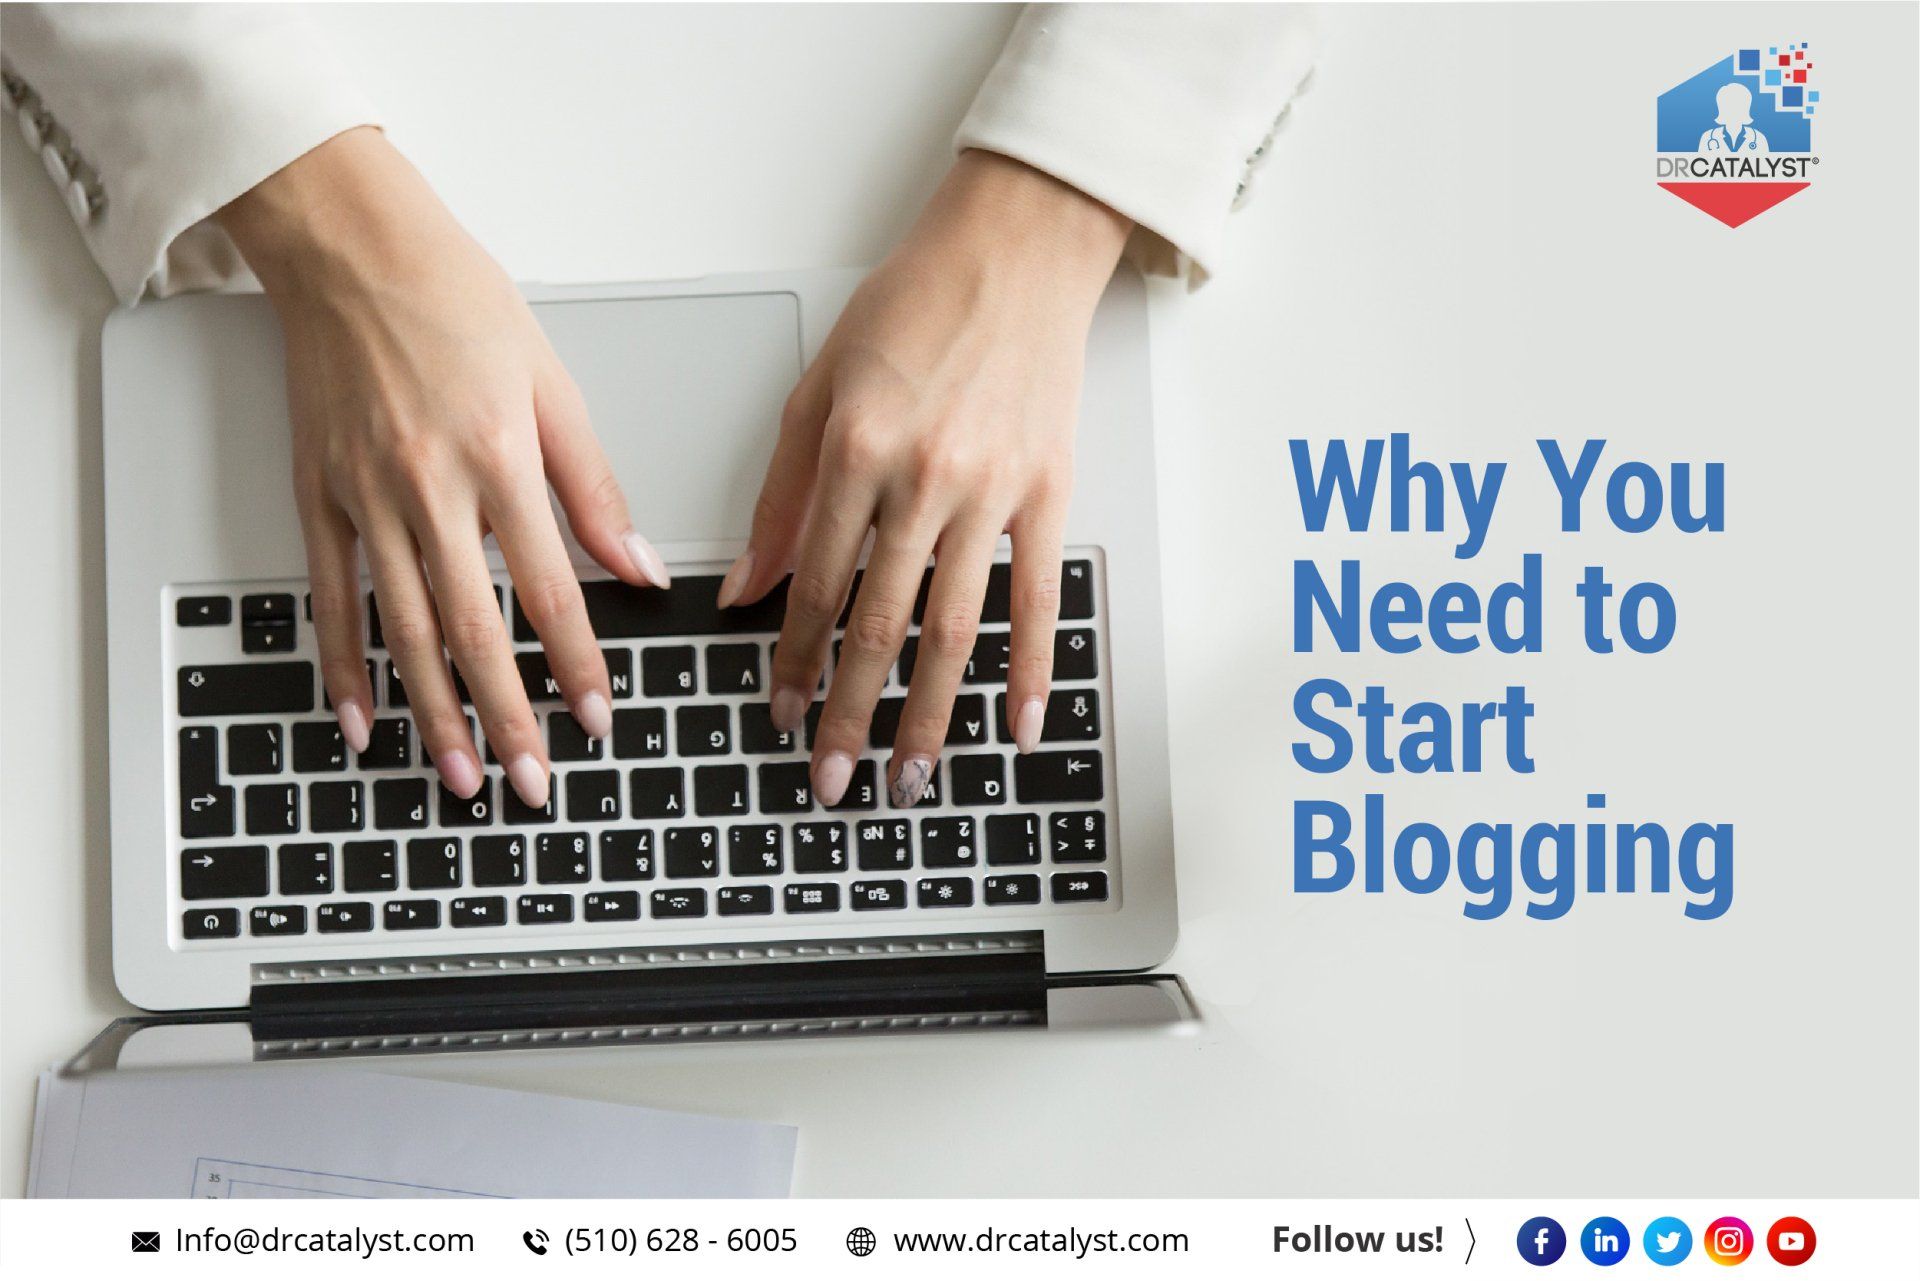 Why You Need to Start Blogging